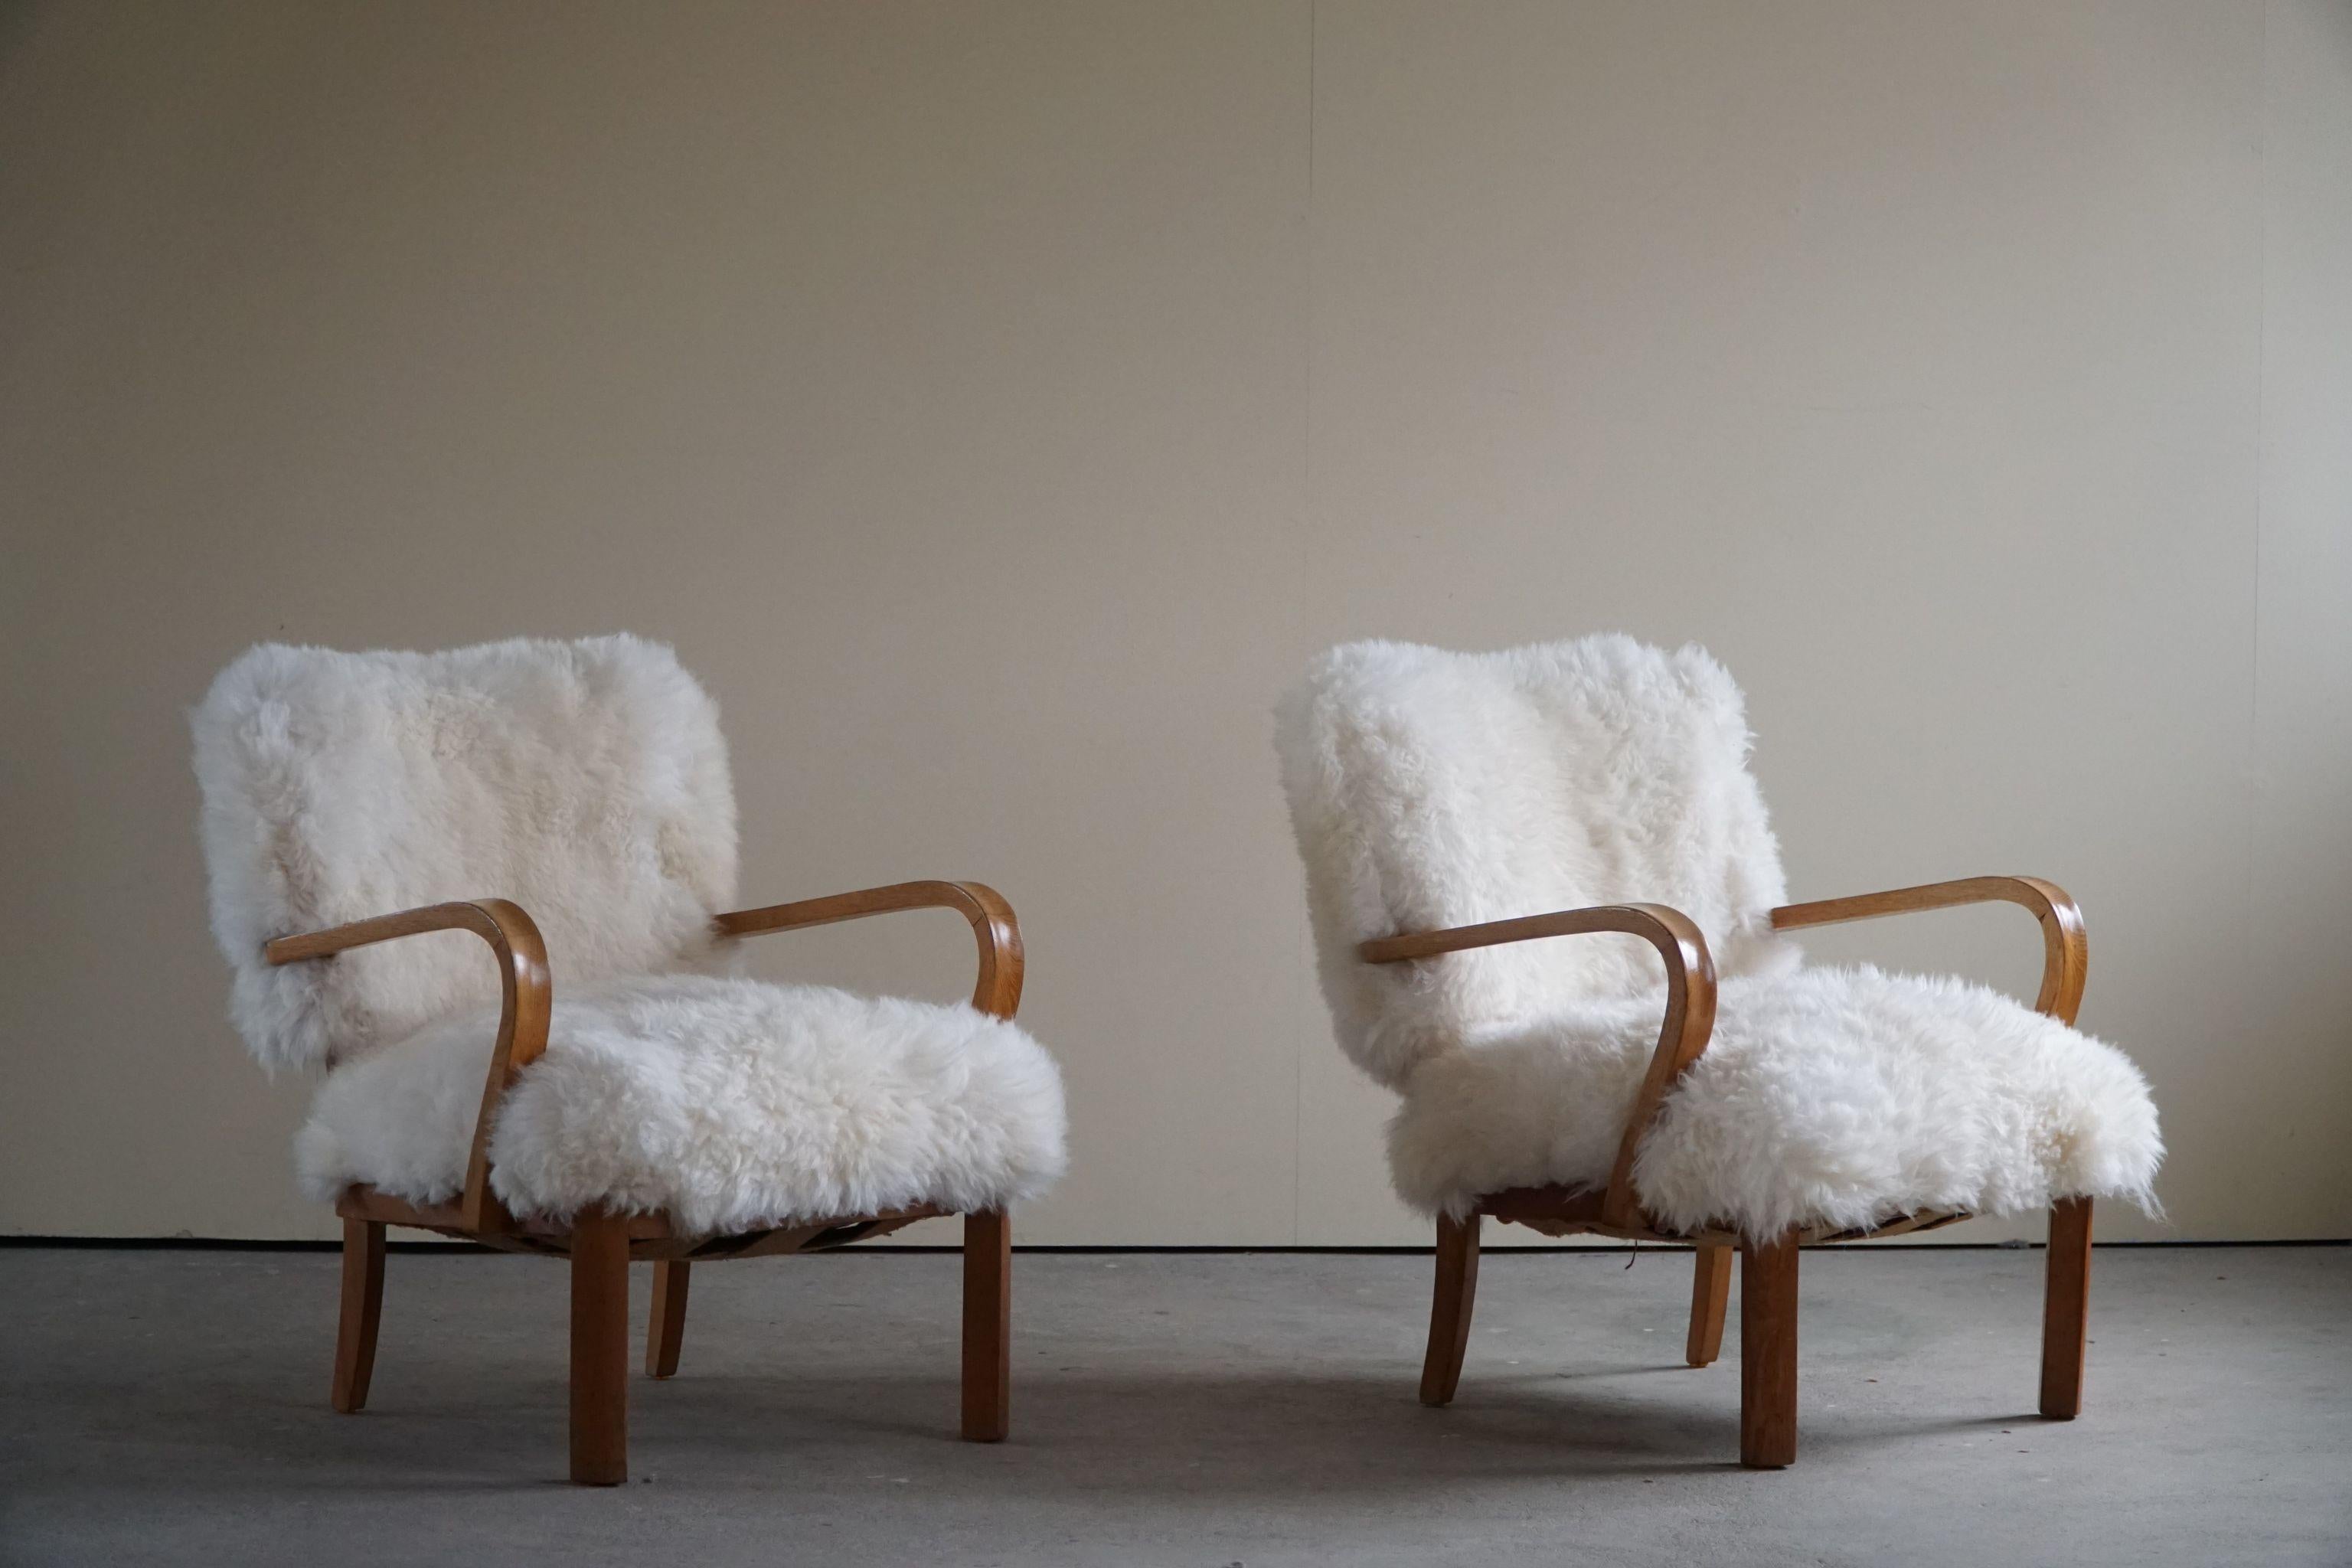 A pair of mid century lounge chairs, reupholstered in long-haired lambswool with a oak frame. Made by a Danish cabinetmaker in 1950s. 

With a heavy focus on functionality, this design style leans toward modernism, while incorporating coziness. The